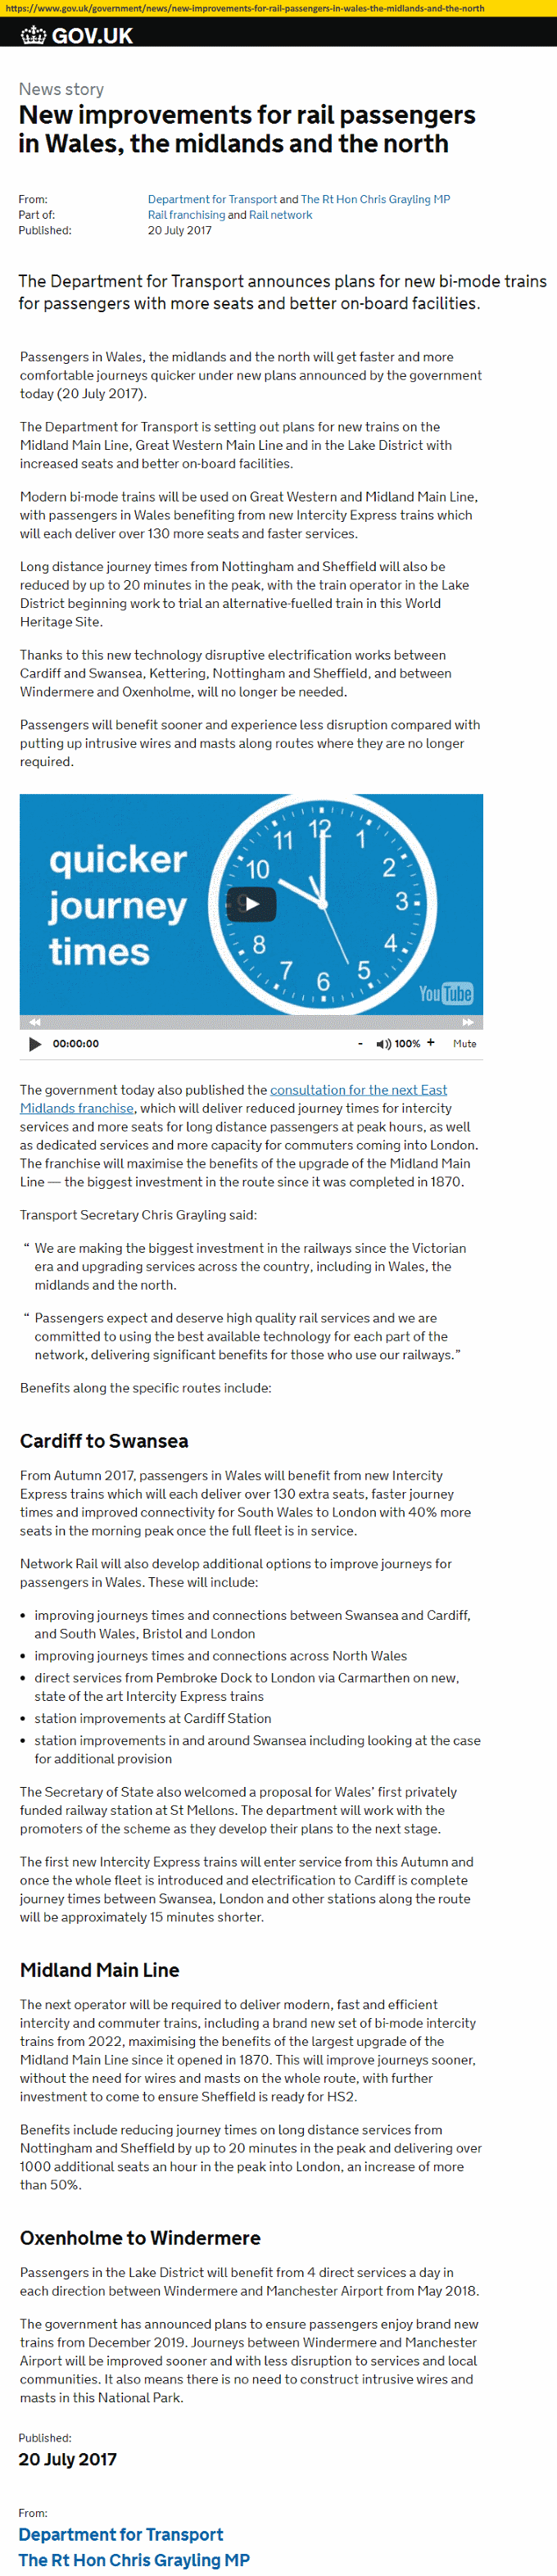 'Thanks to  new bi-mode technology disruptive electrification works between Cardiff and Swansea, Kettering, Nottingham and Sheffield, and between Windermere and Oxenholme, will no longer be needed' - Department for Transport, 20 July 2017